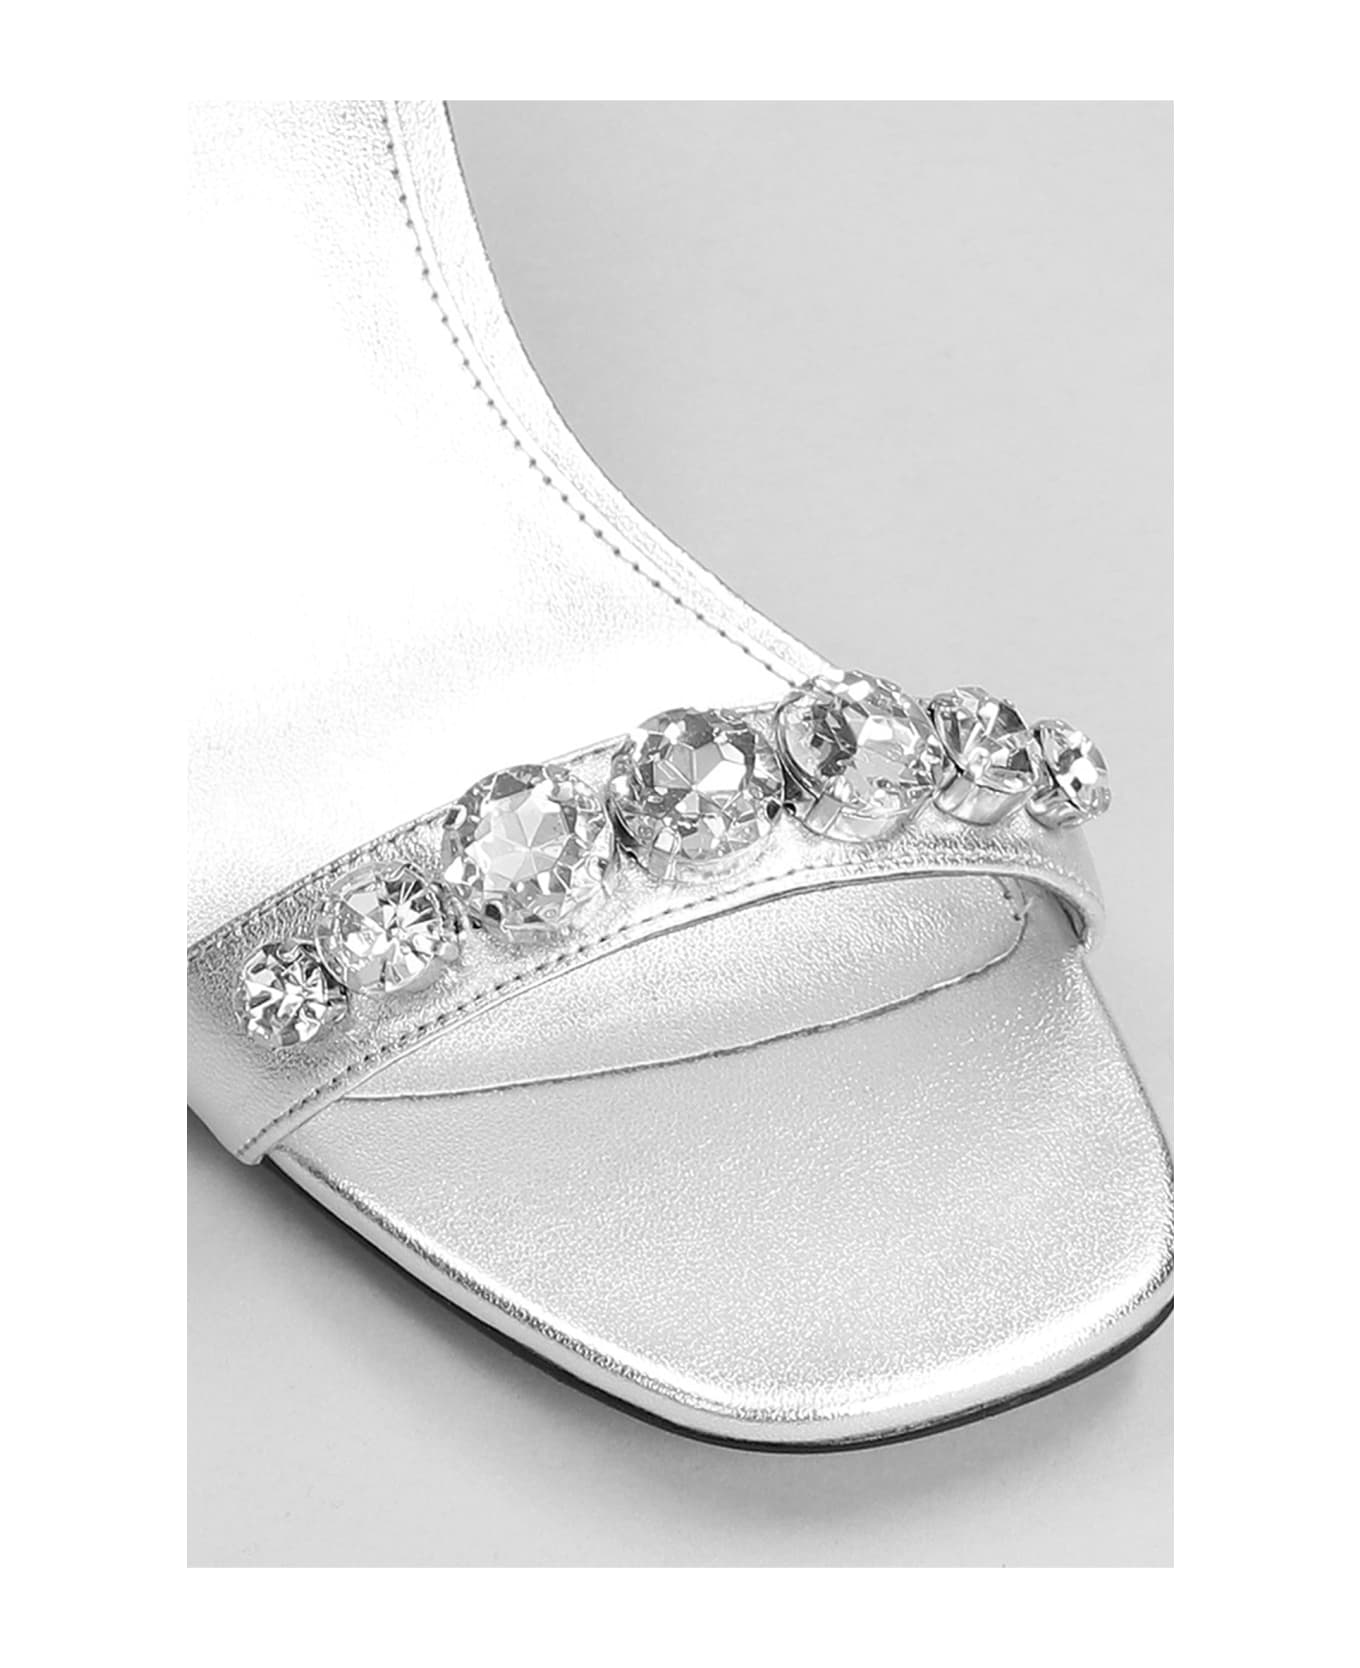 Michael Kors Clara Sandals In Silver Leather - Argento サンダル